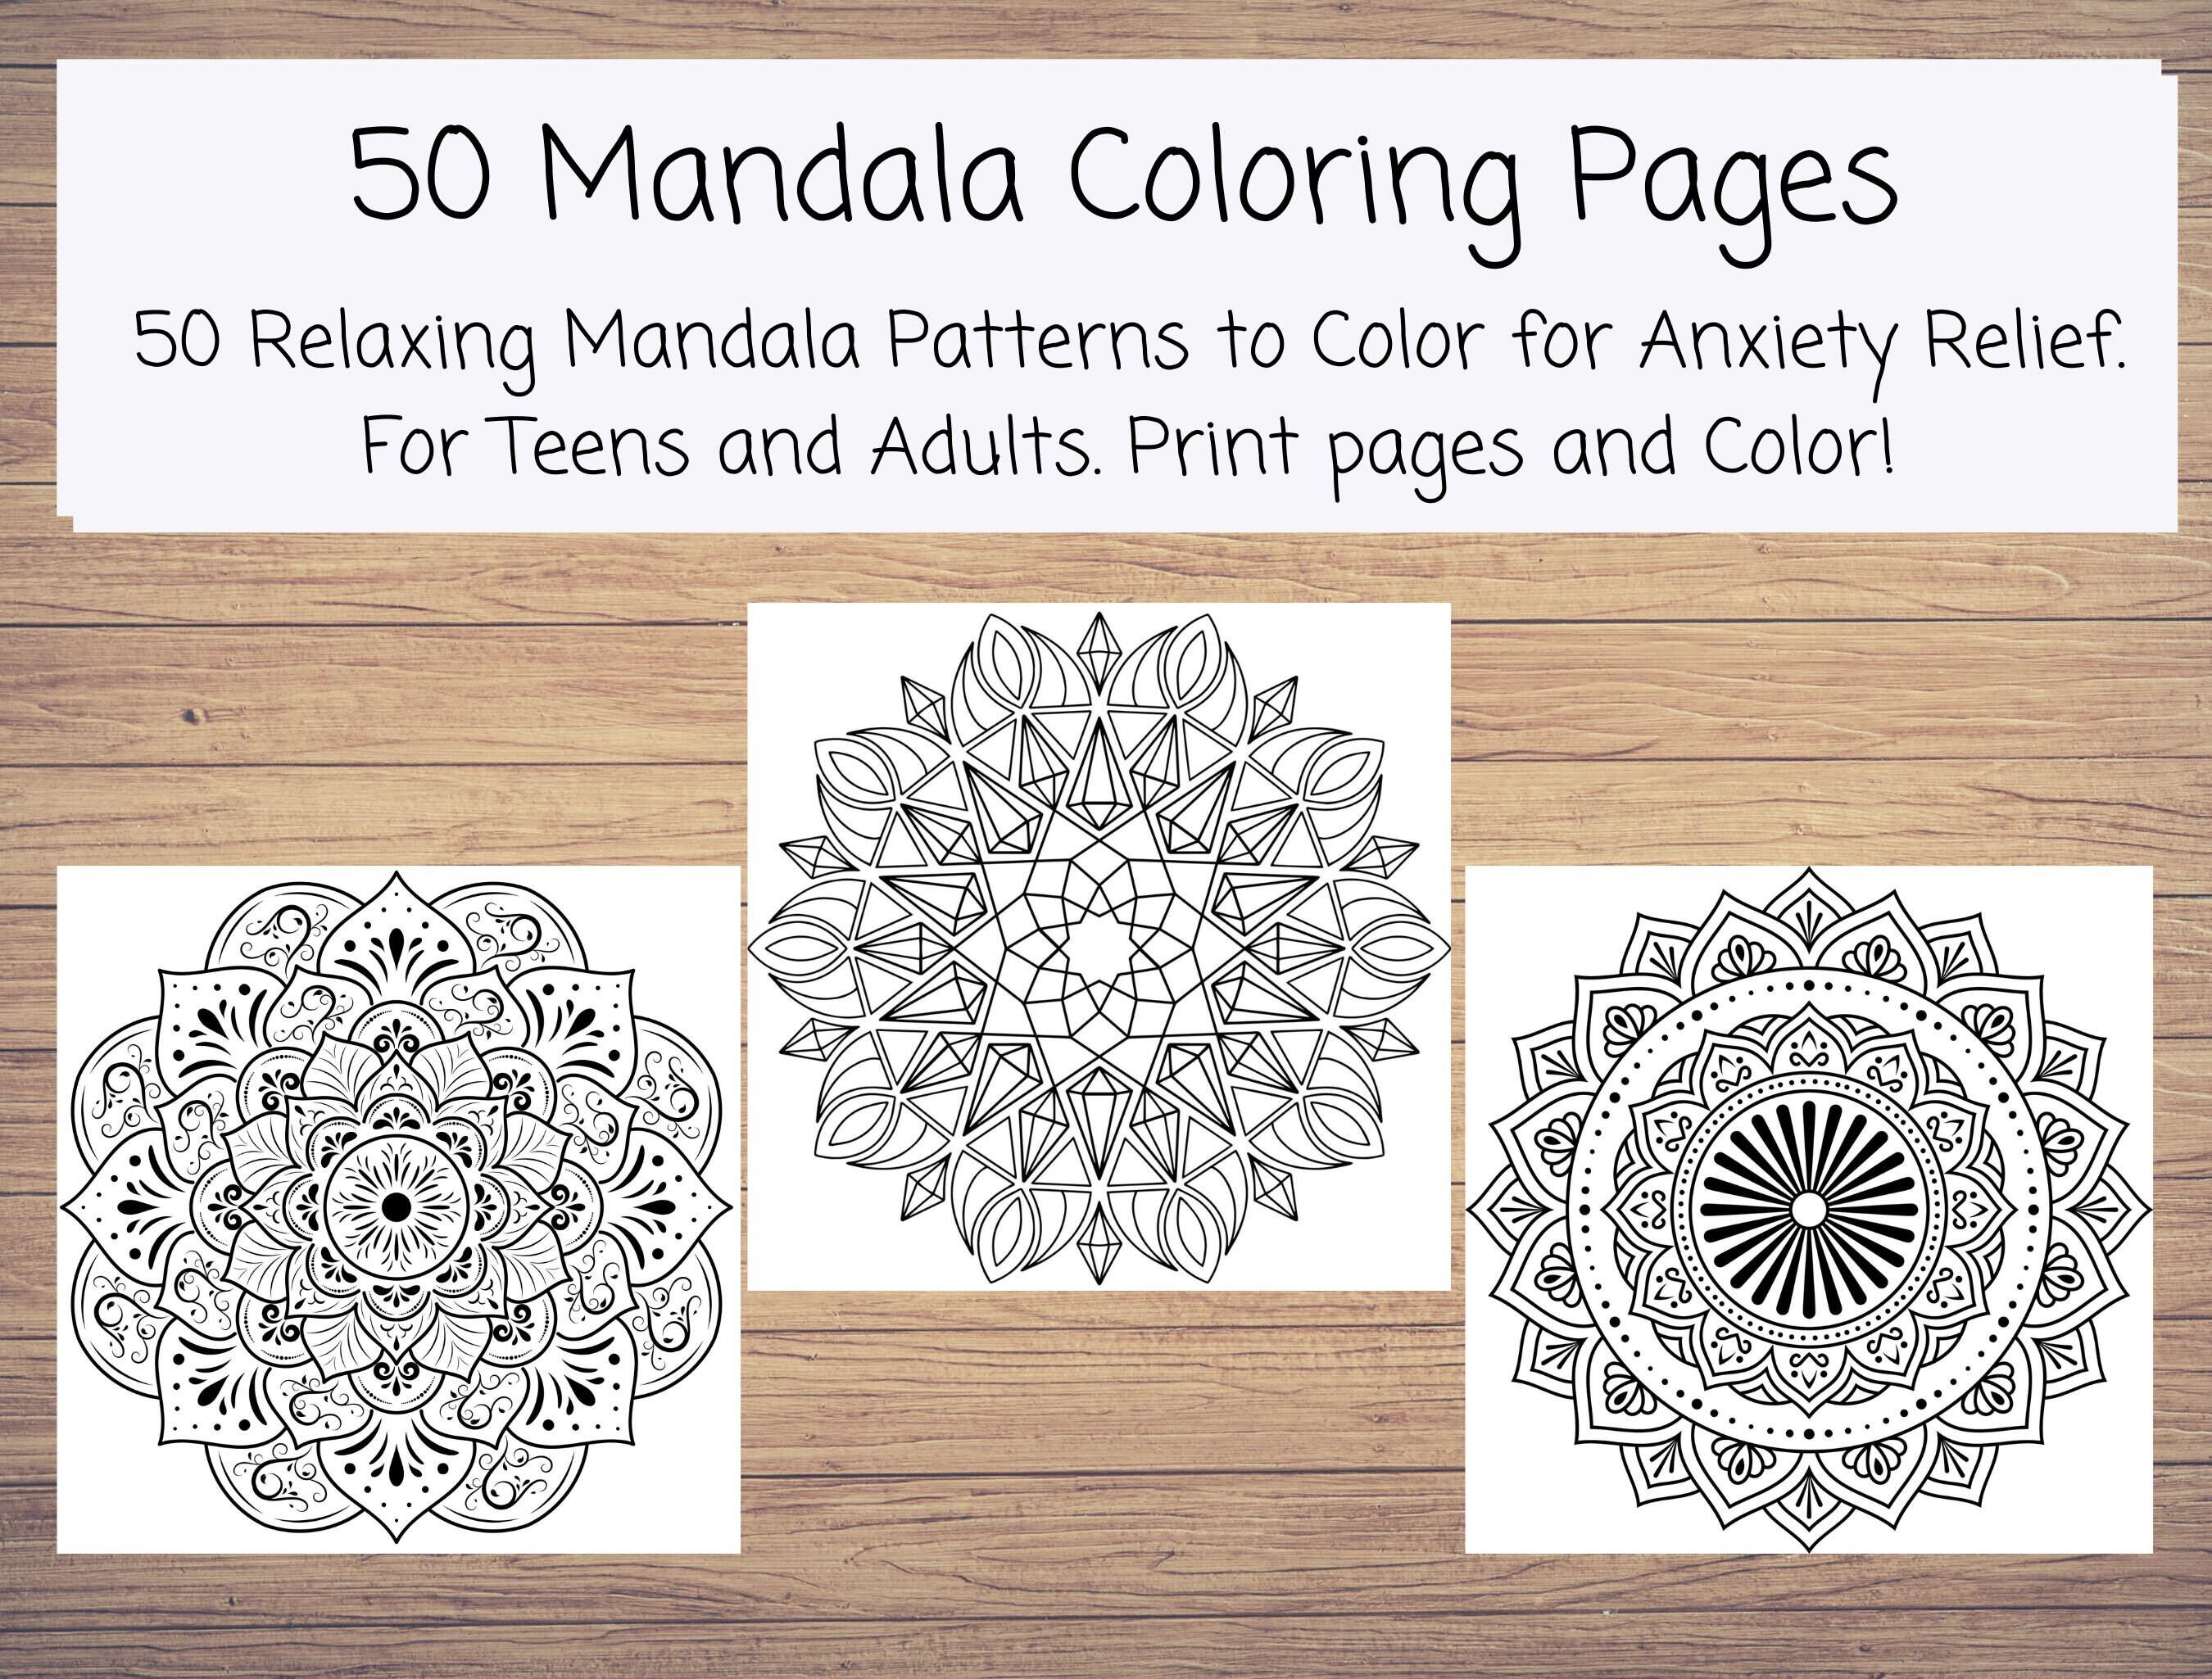  Incredible Mandalas, An Easy Mandala Coloring Book for Adults  for Relaxation and Stress Relief (Incredible Patterns